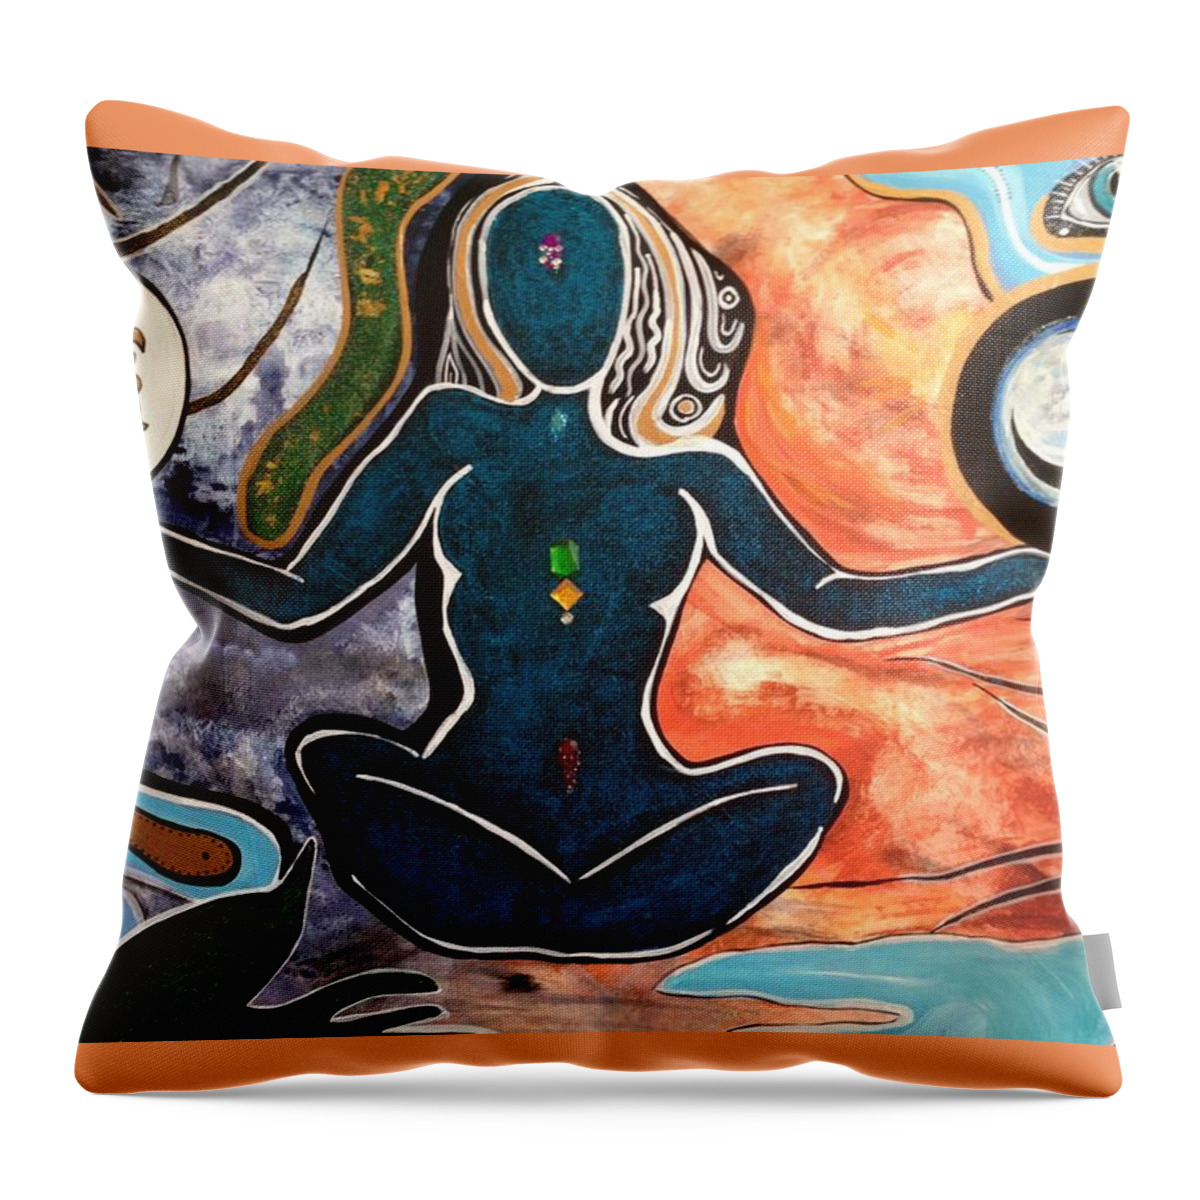  Throw Pillow featuring the painting Maintaining The Balance by Tracy Mcdurmon